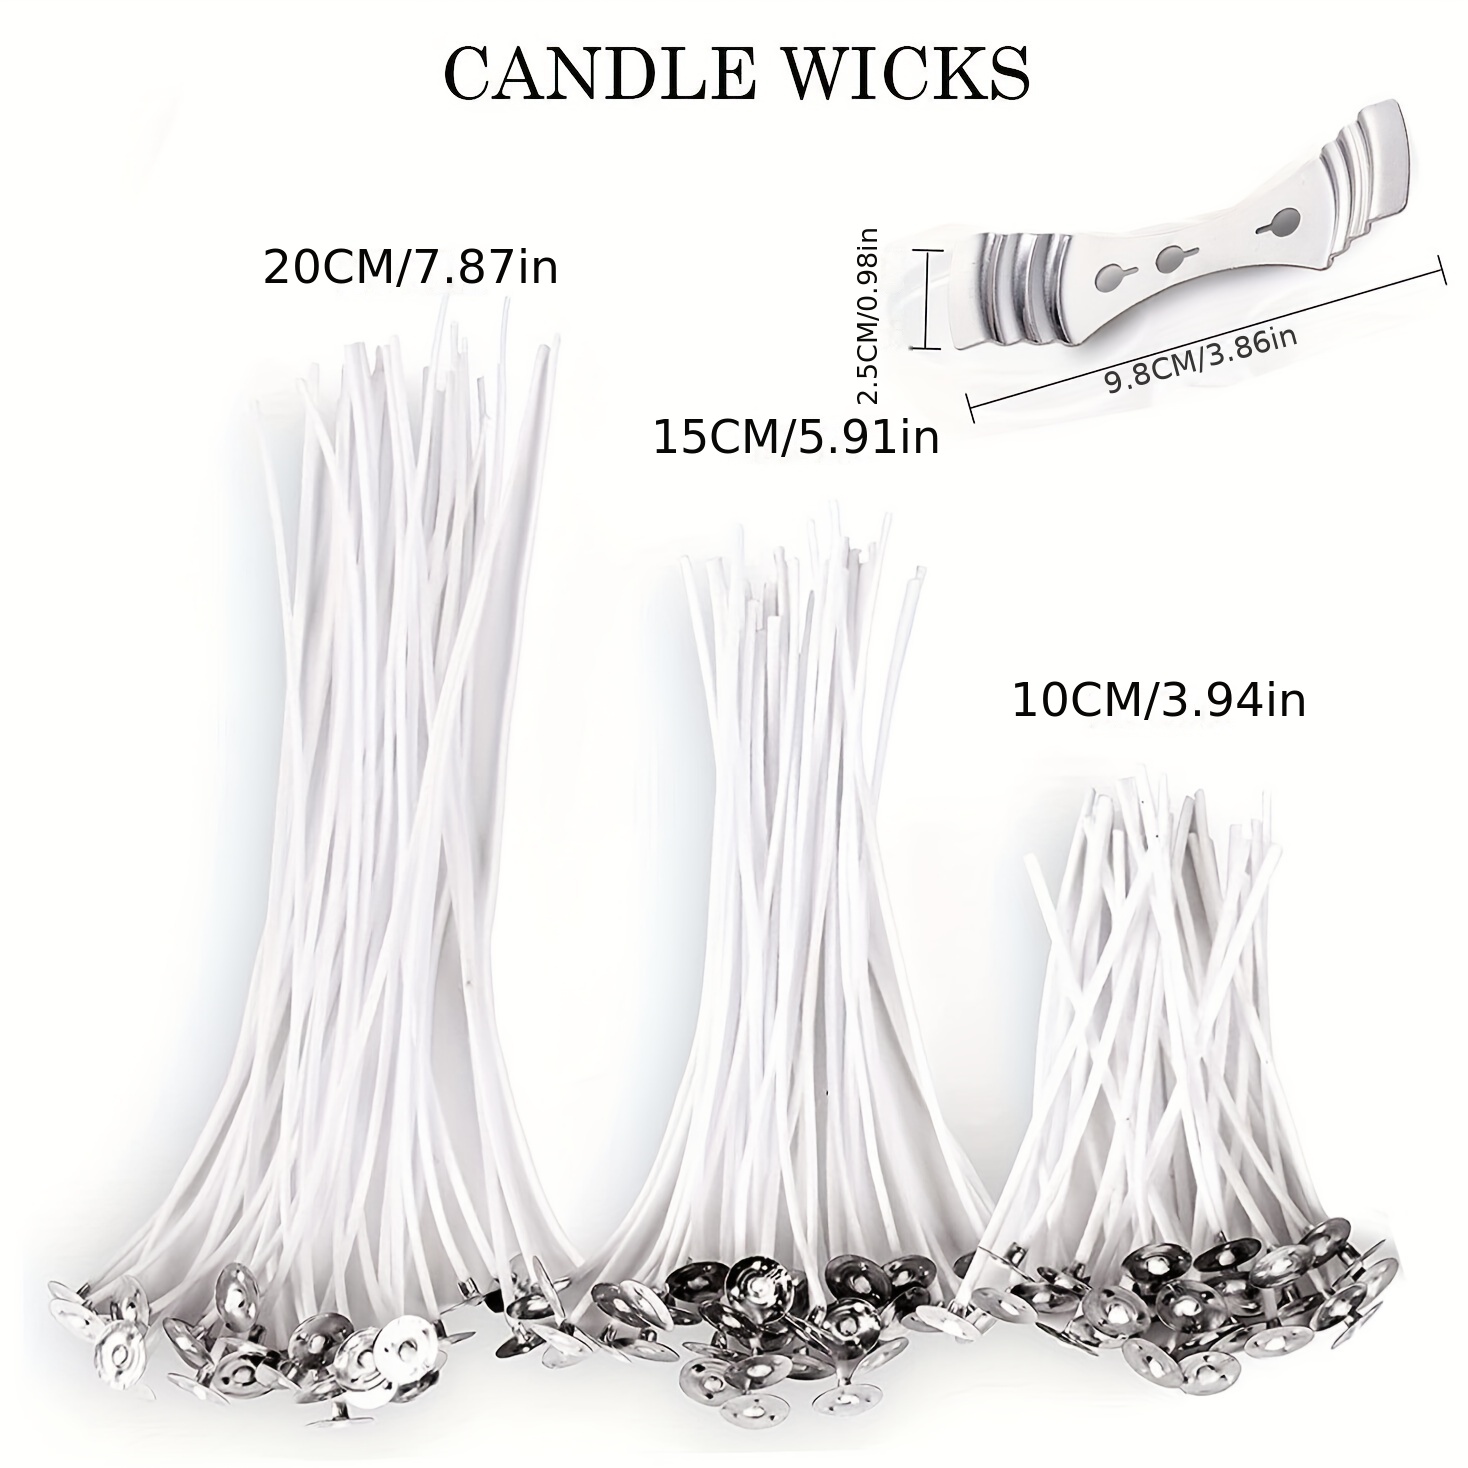 50 Candle Wicks 6 inch Cotton Core Pre Waxed With Sustainers For Candle  Making